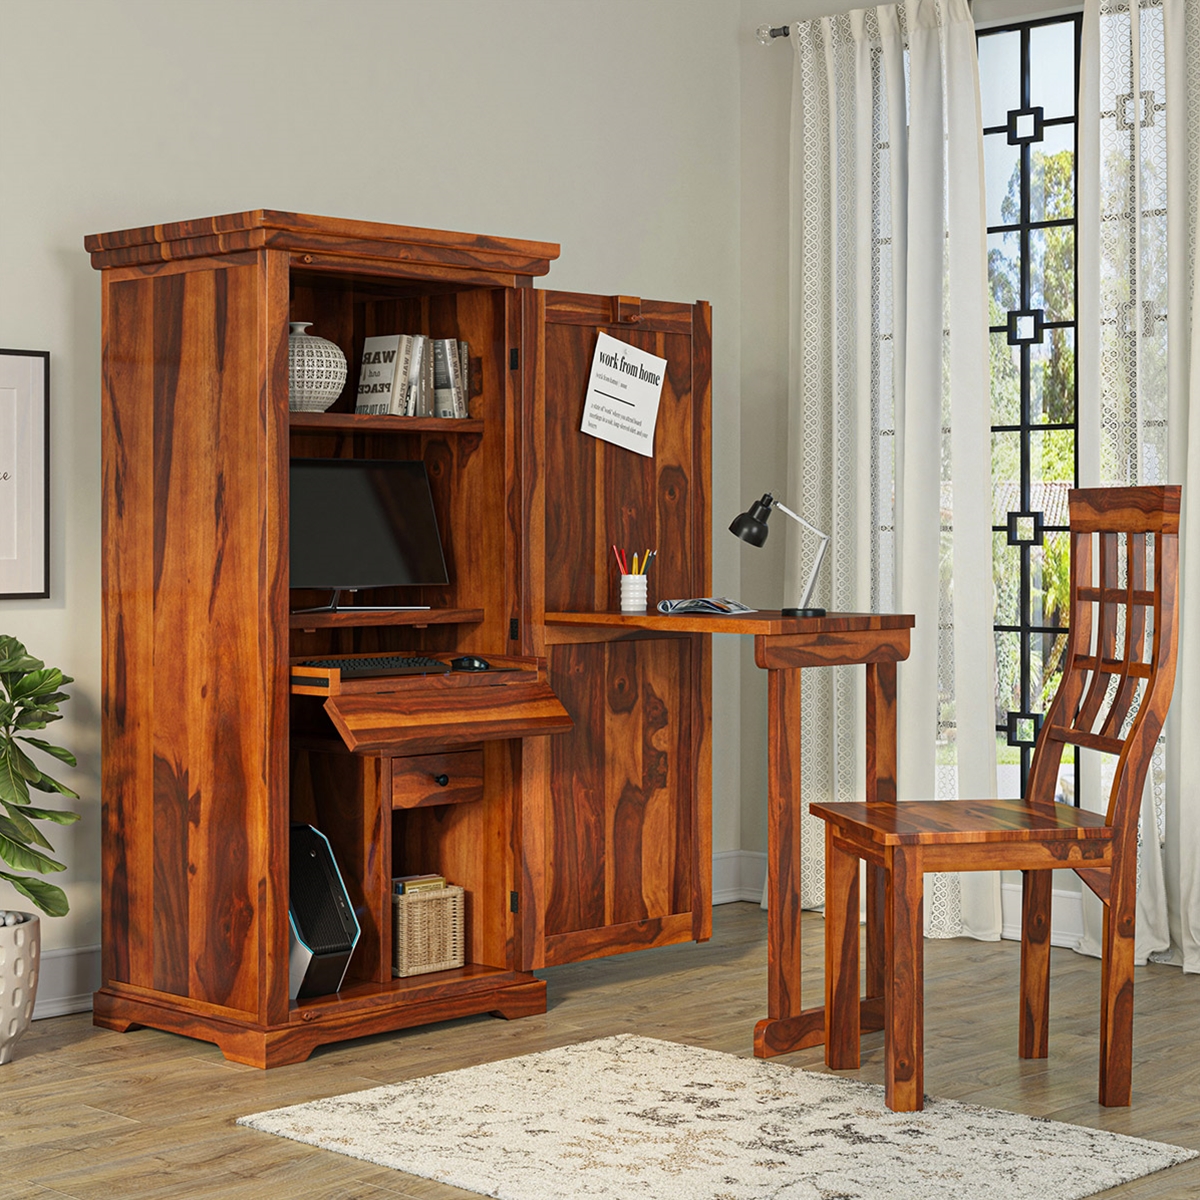 https://www.sierralivingconcepts.com/images/thumbs/0391139_space-saving-solid-wood-folding-armoire-desk-with-storage-cabinet.jpeg